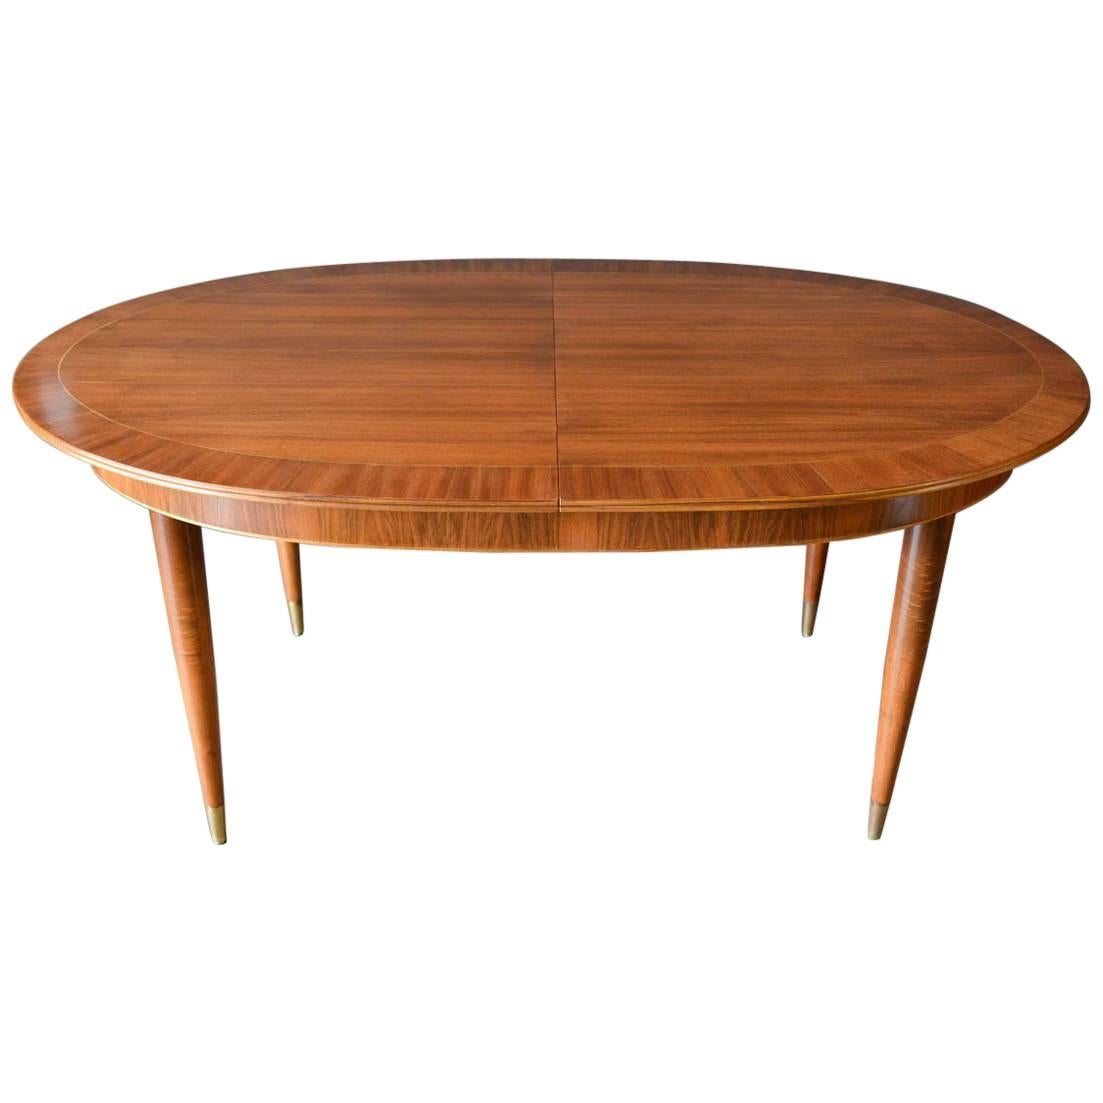 Mahogany and Brass Dining Table by Erno Fabry, Germany, circa 1955